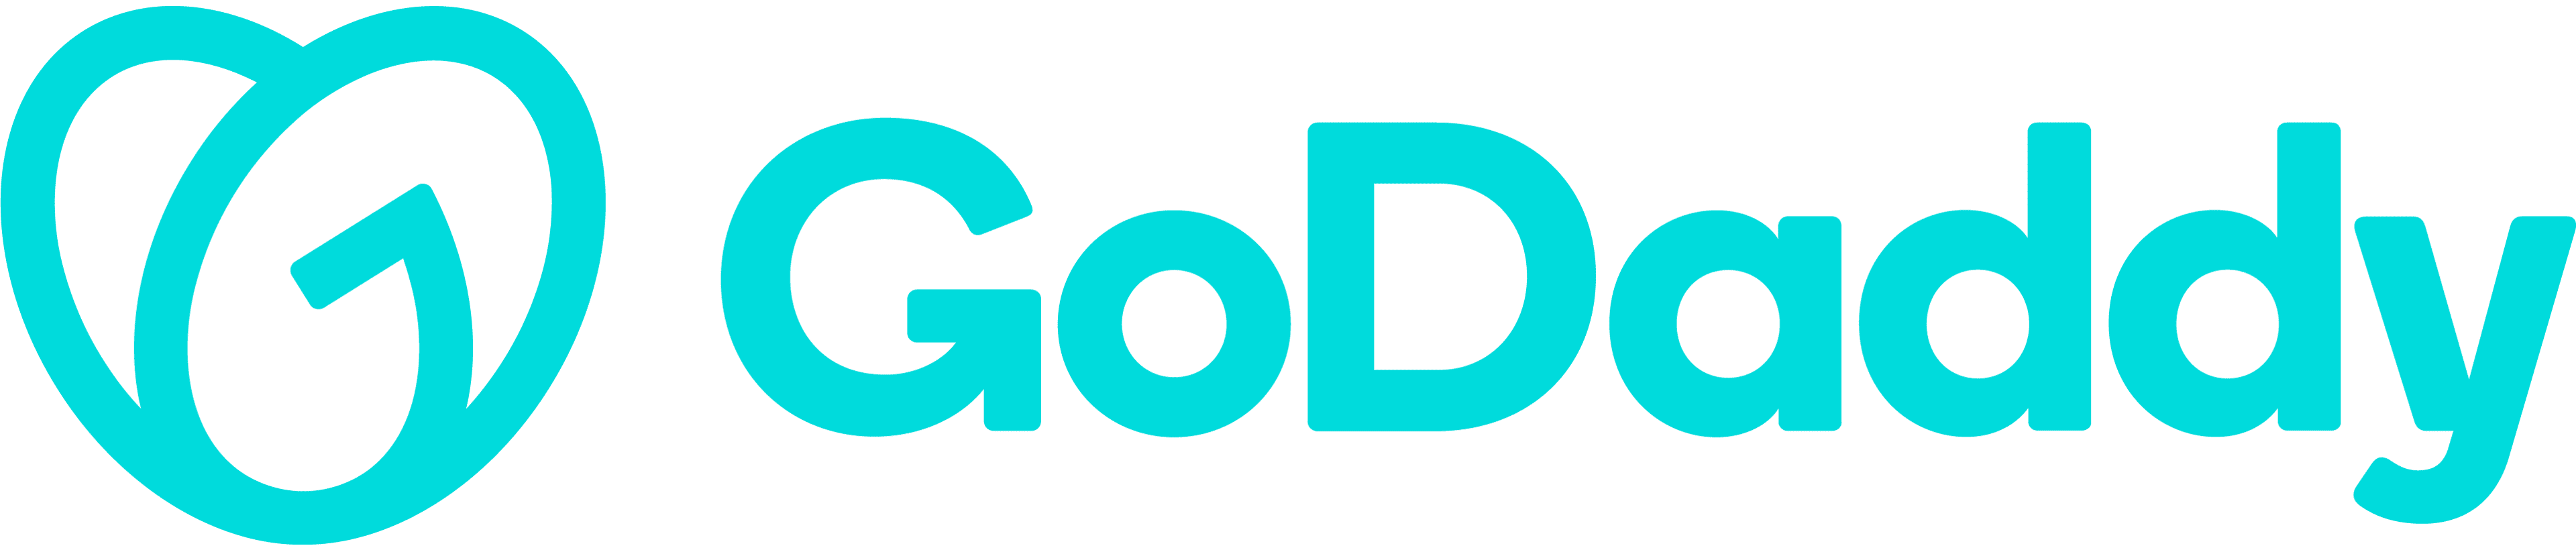 Resources-Software-Tools-Godaddy-logo